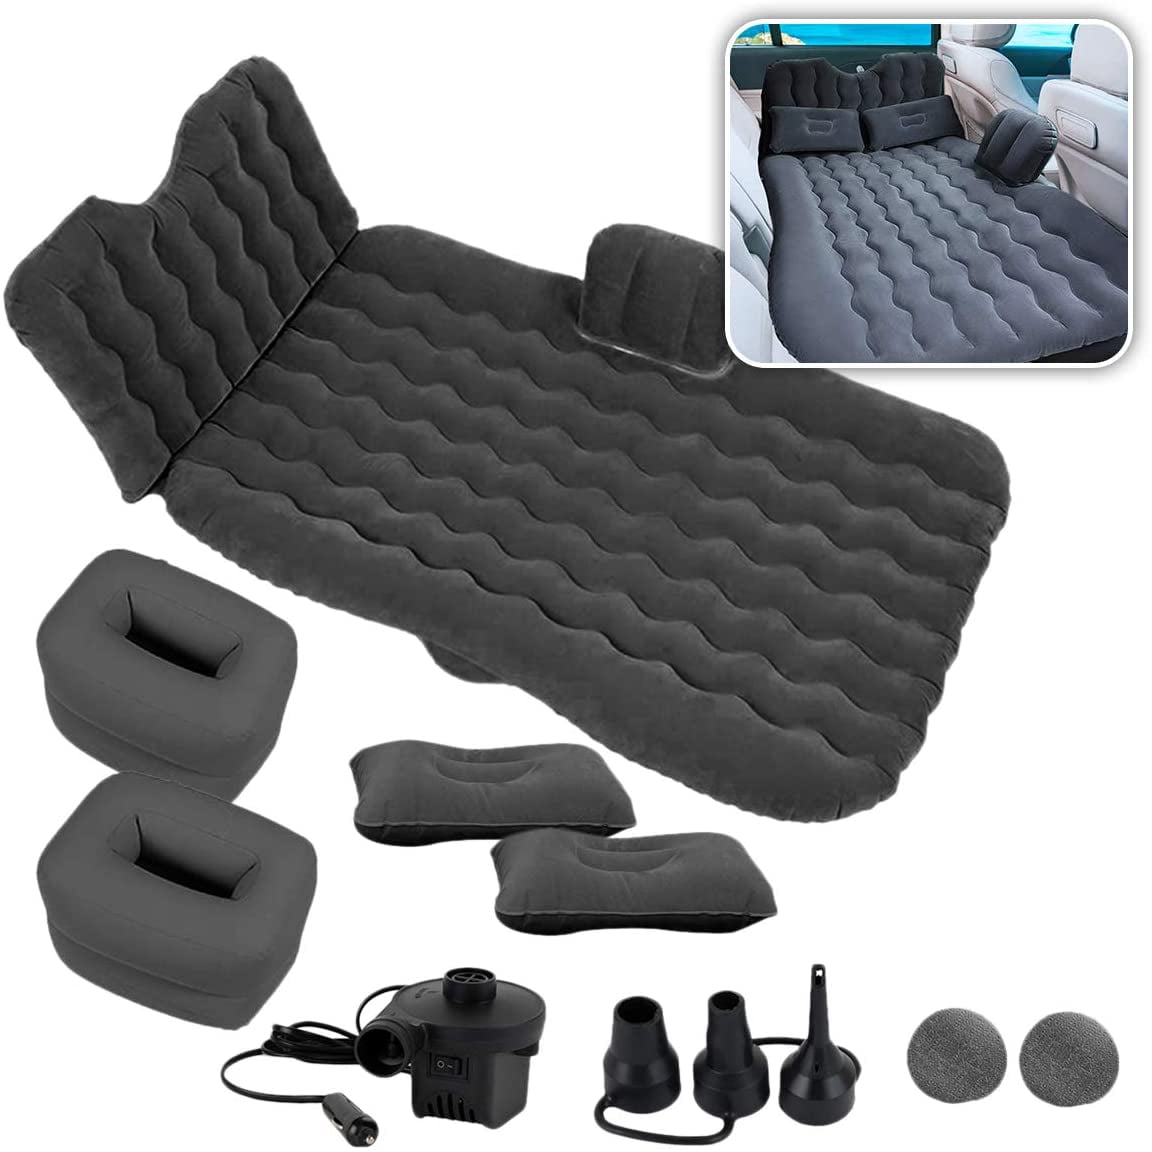 Inflatable Car Mattress Air Bed Travel Back Seat Sleep Rest Mat with 